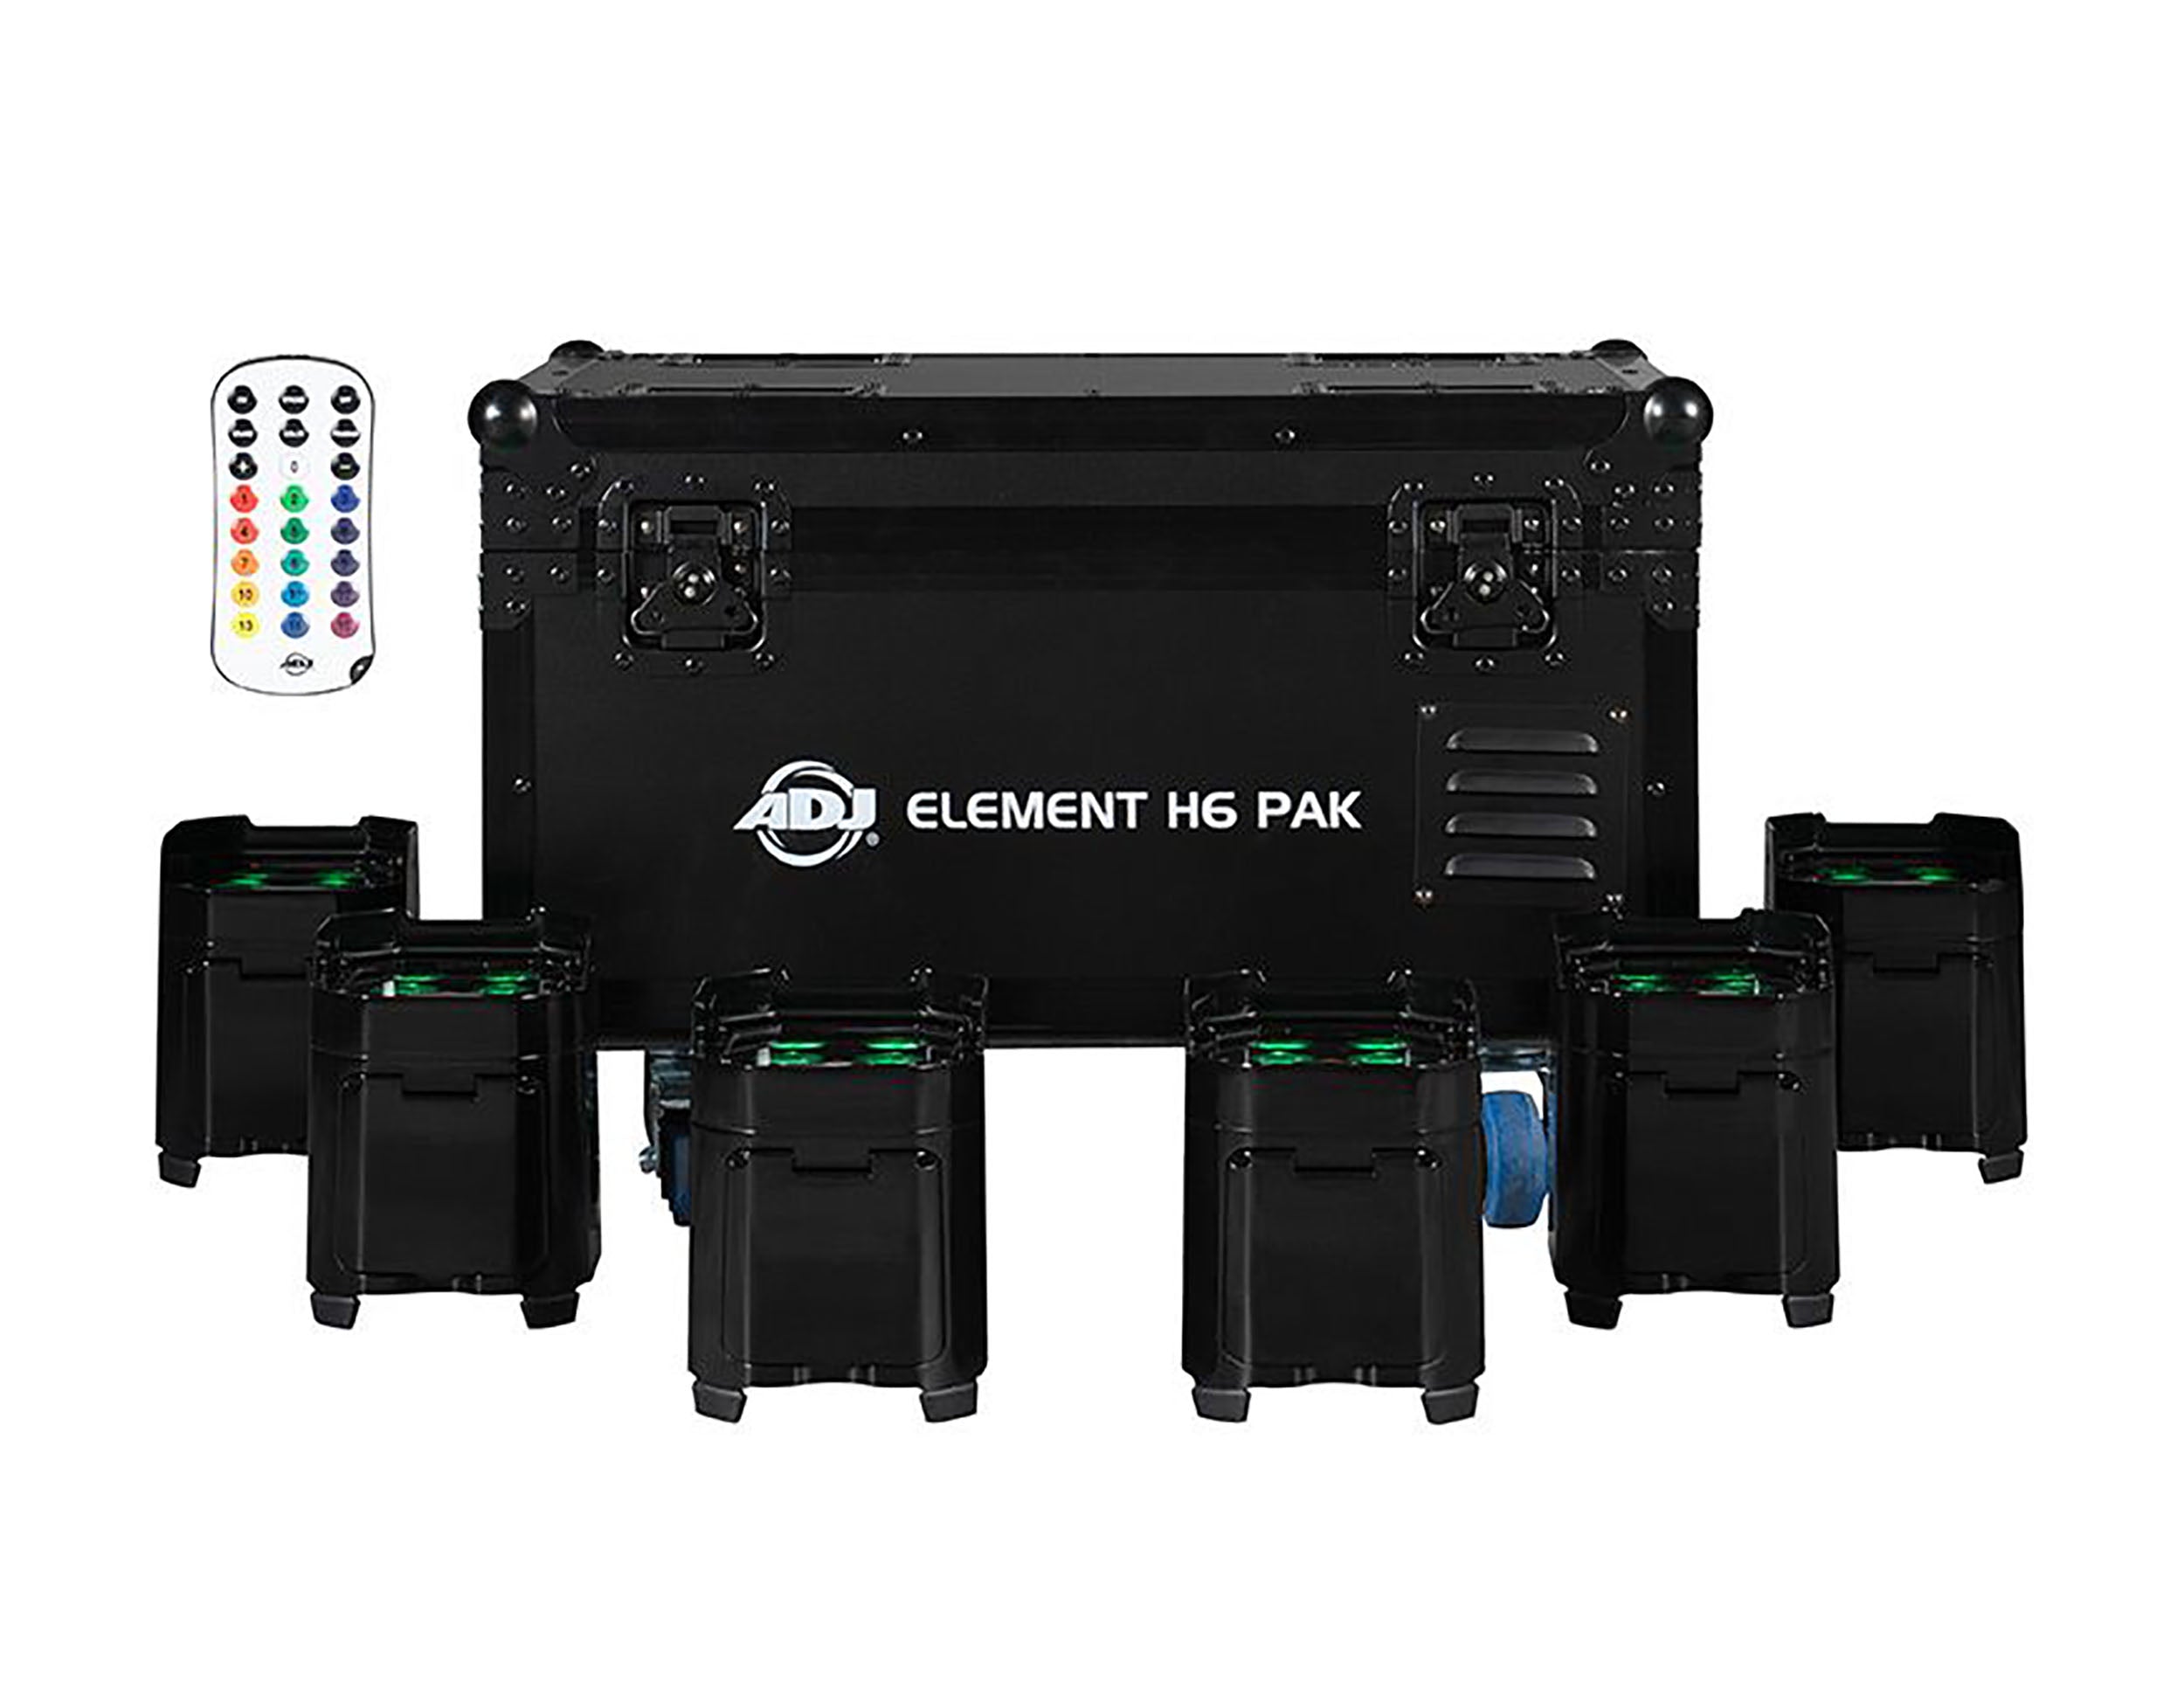 ADJ Element H6, Event Up Lighting System With (6) IP54-Rated Black Fixtures and Charging Flight Case by ADJ